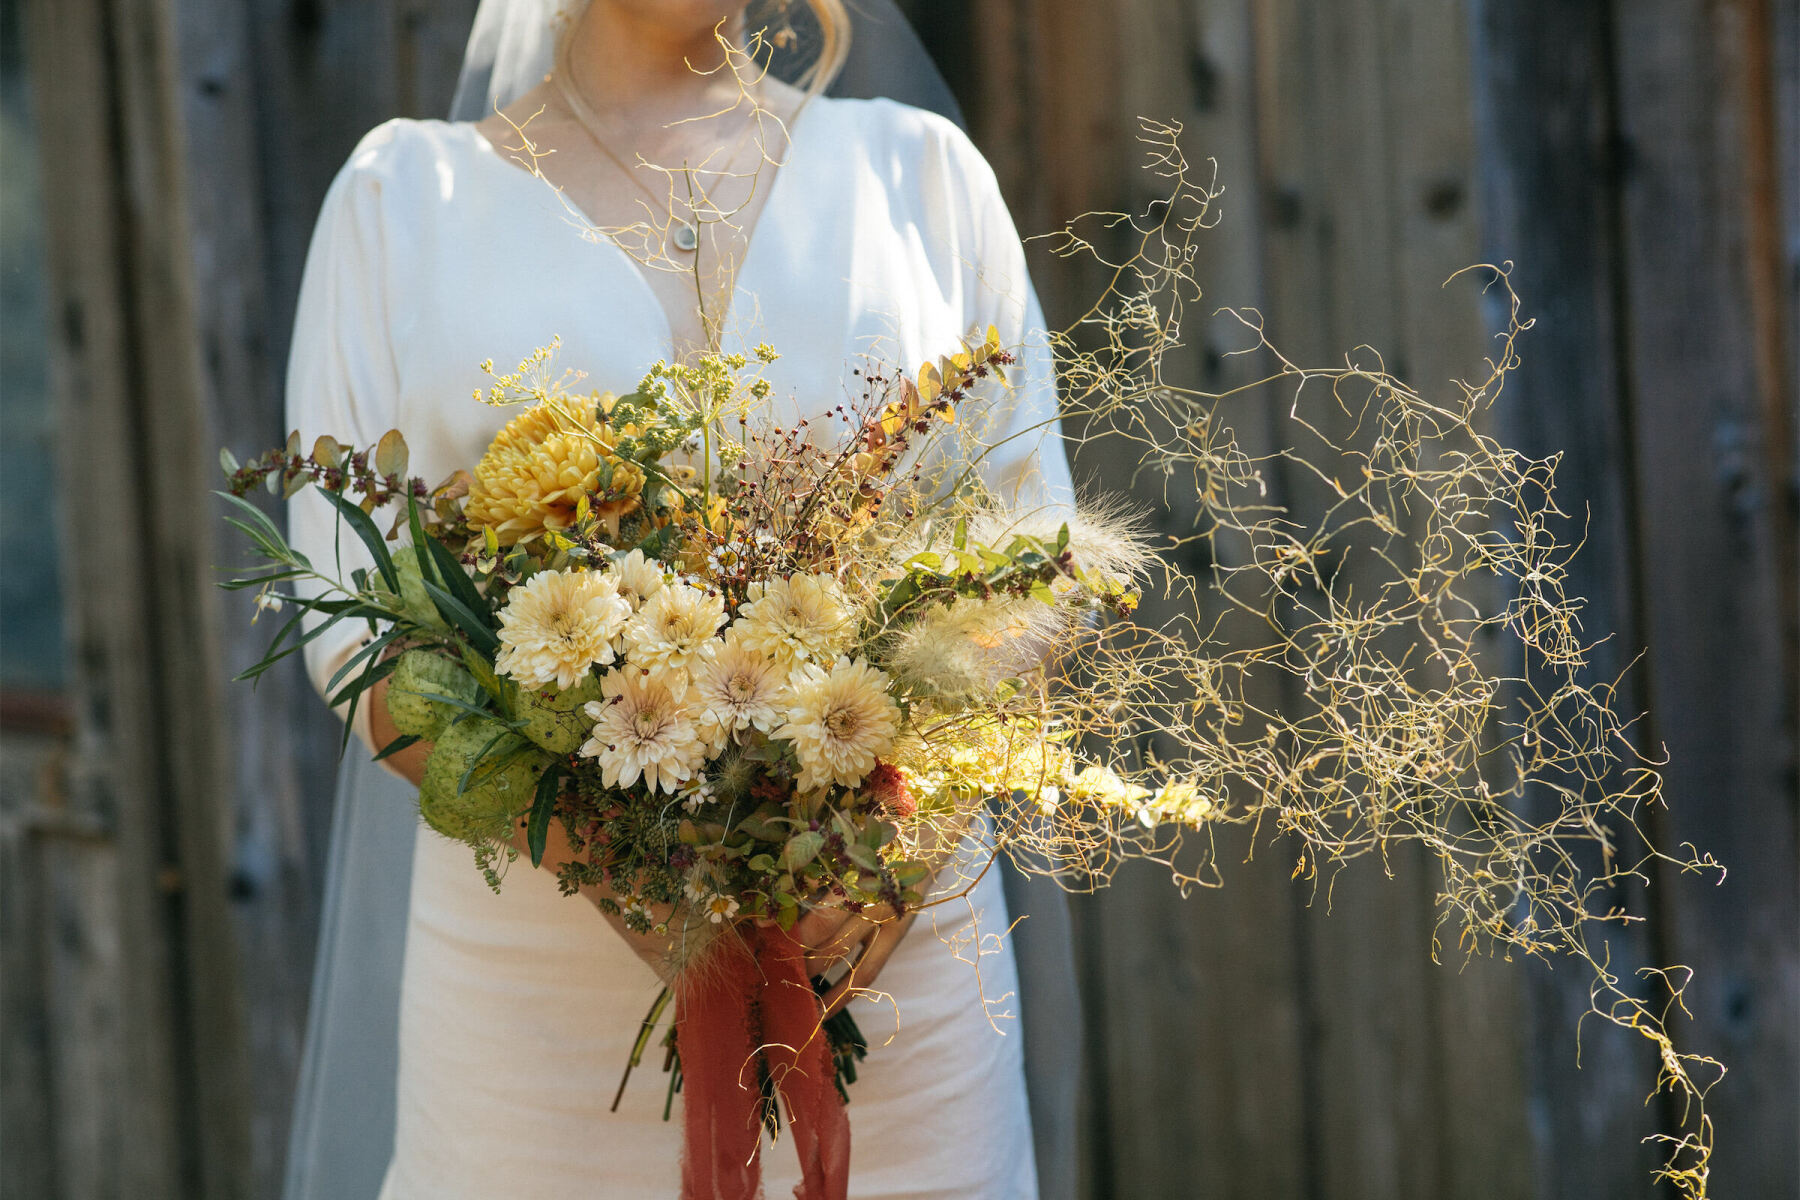 This Big Sur wedding bouquet was wild and asymmetrical, with a mix of unique blooms and greenery.